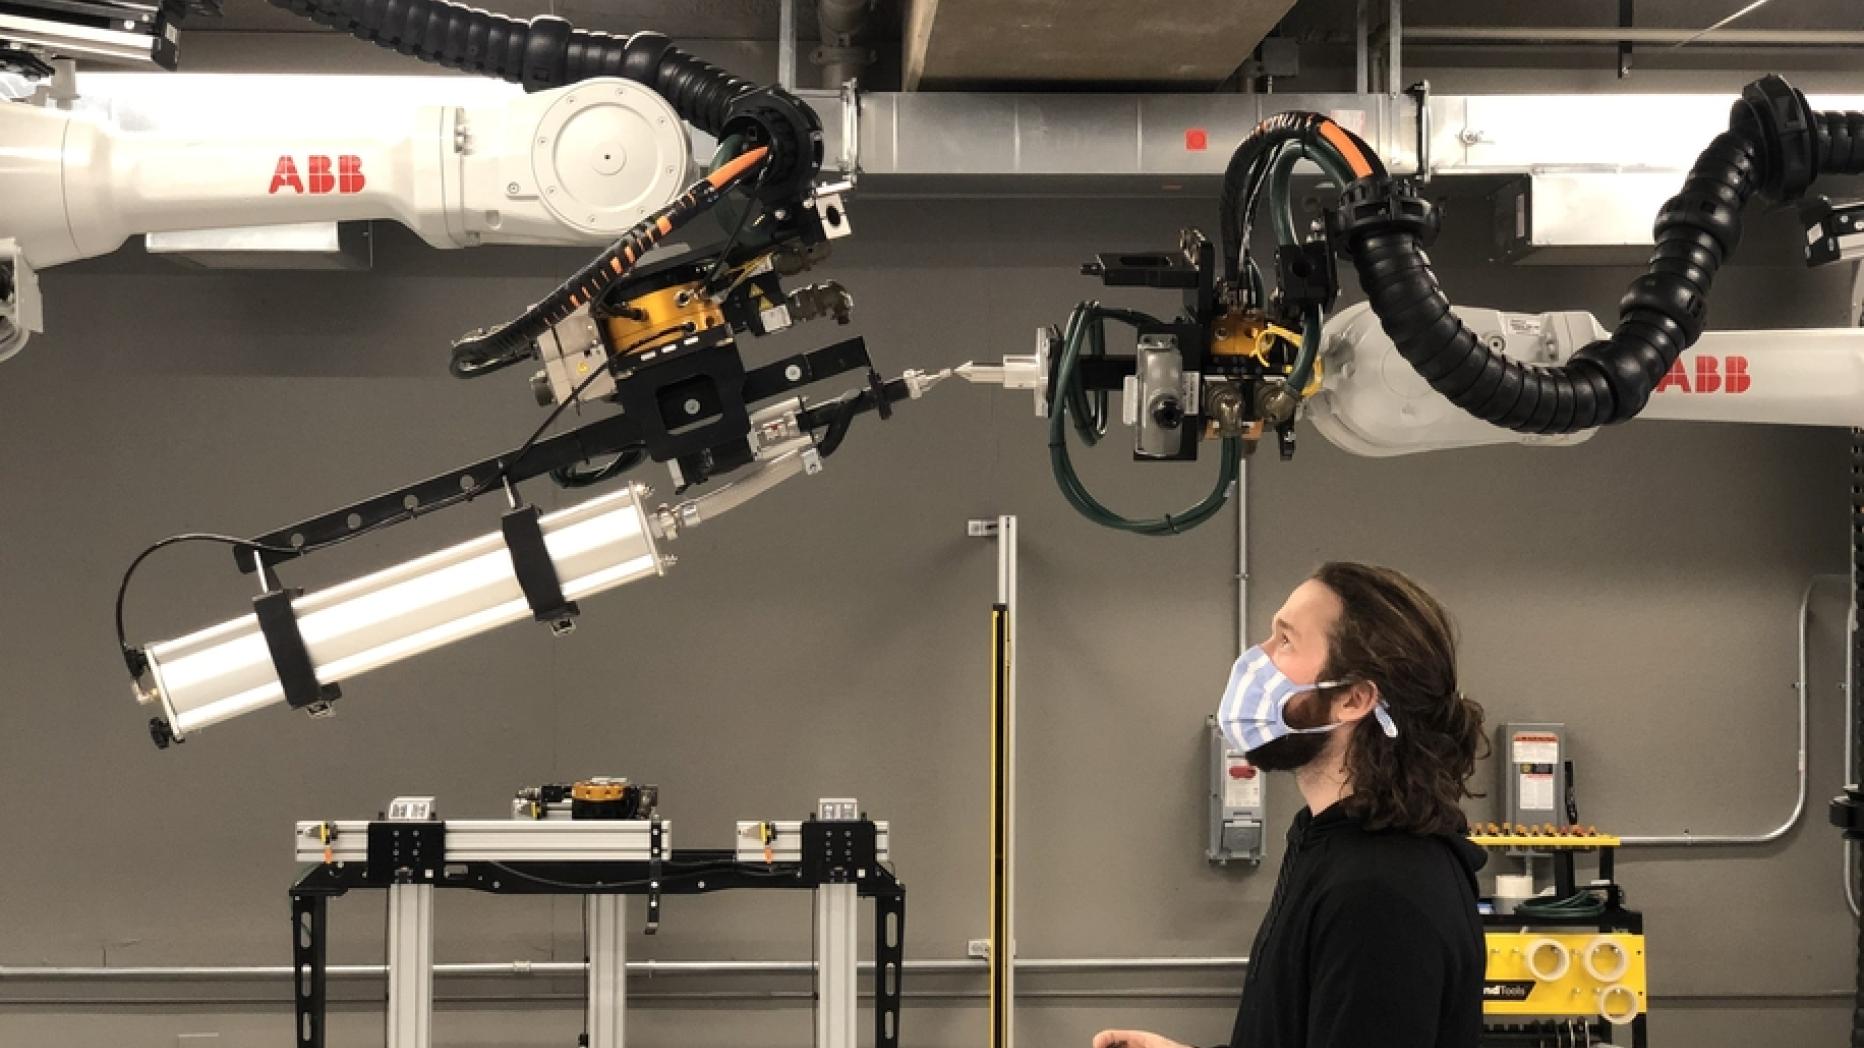 A man peers up at two robotic arms meeting overhead